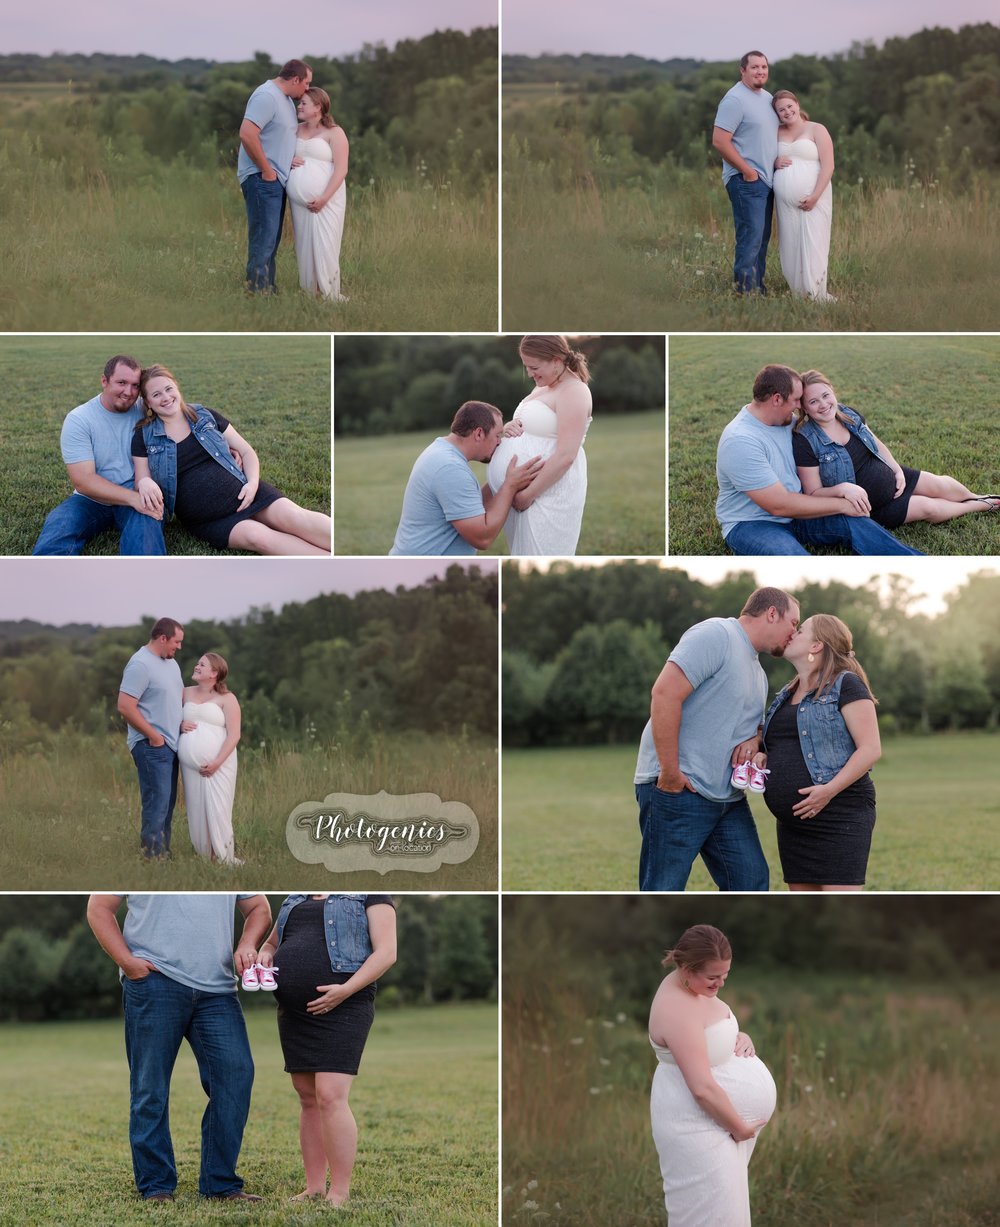  maternity_session_photography_gown_rustic_nature_background_with_husband_ideas_poses_simple 2 